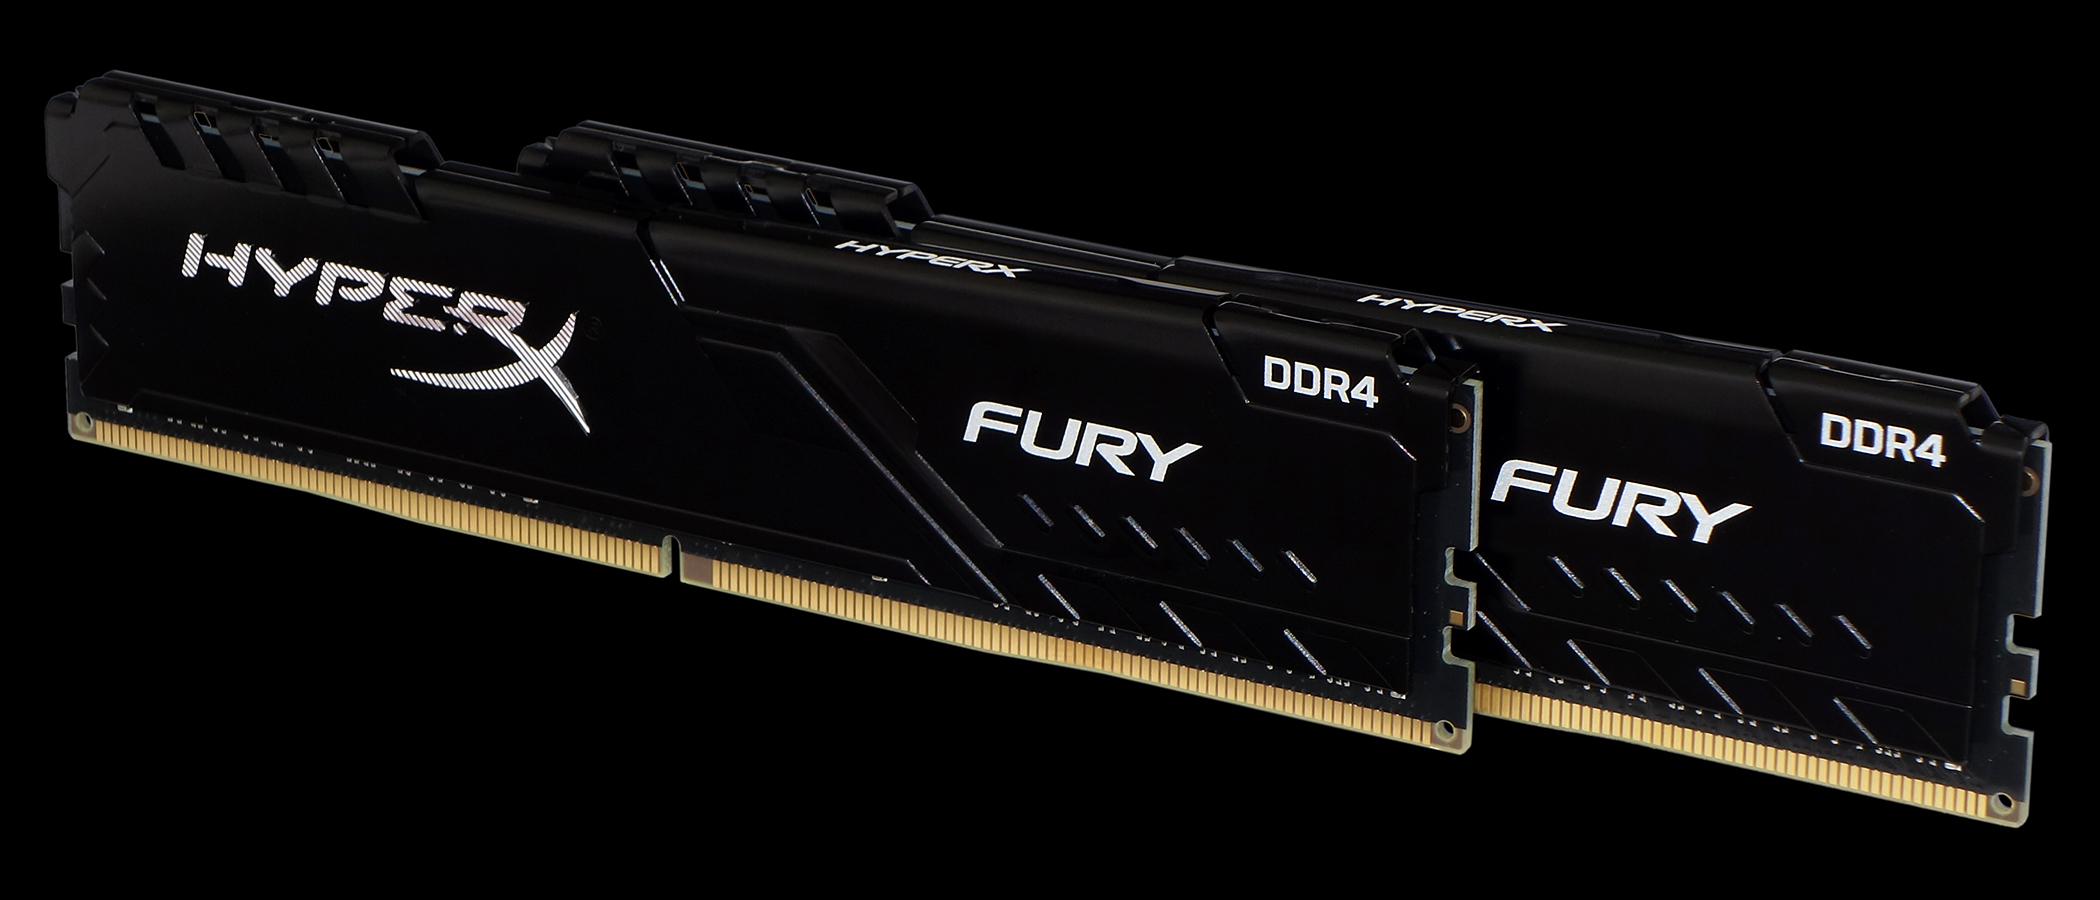 Korst dood gaan Soeverein HyperX Fury 32GB DDR4-3733 Dual-Channel Kit Review: A Faster 2x 16GB Option  | Tom's Hardware